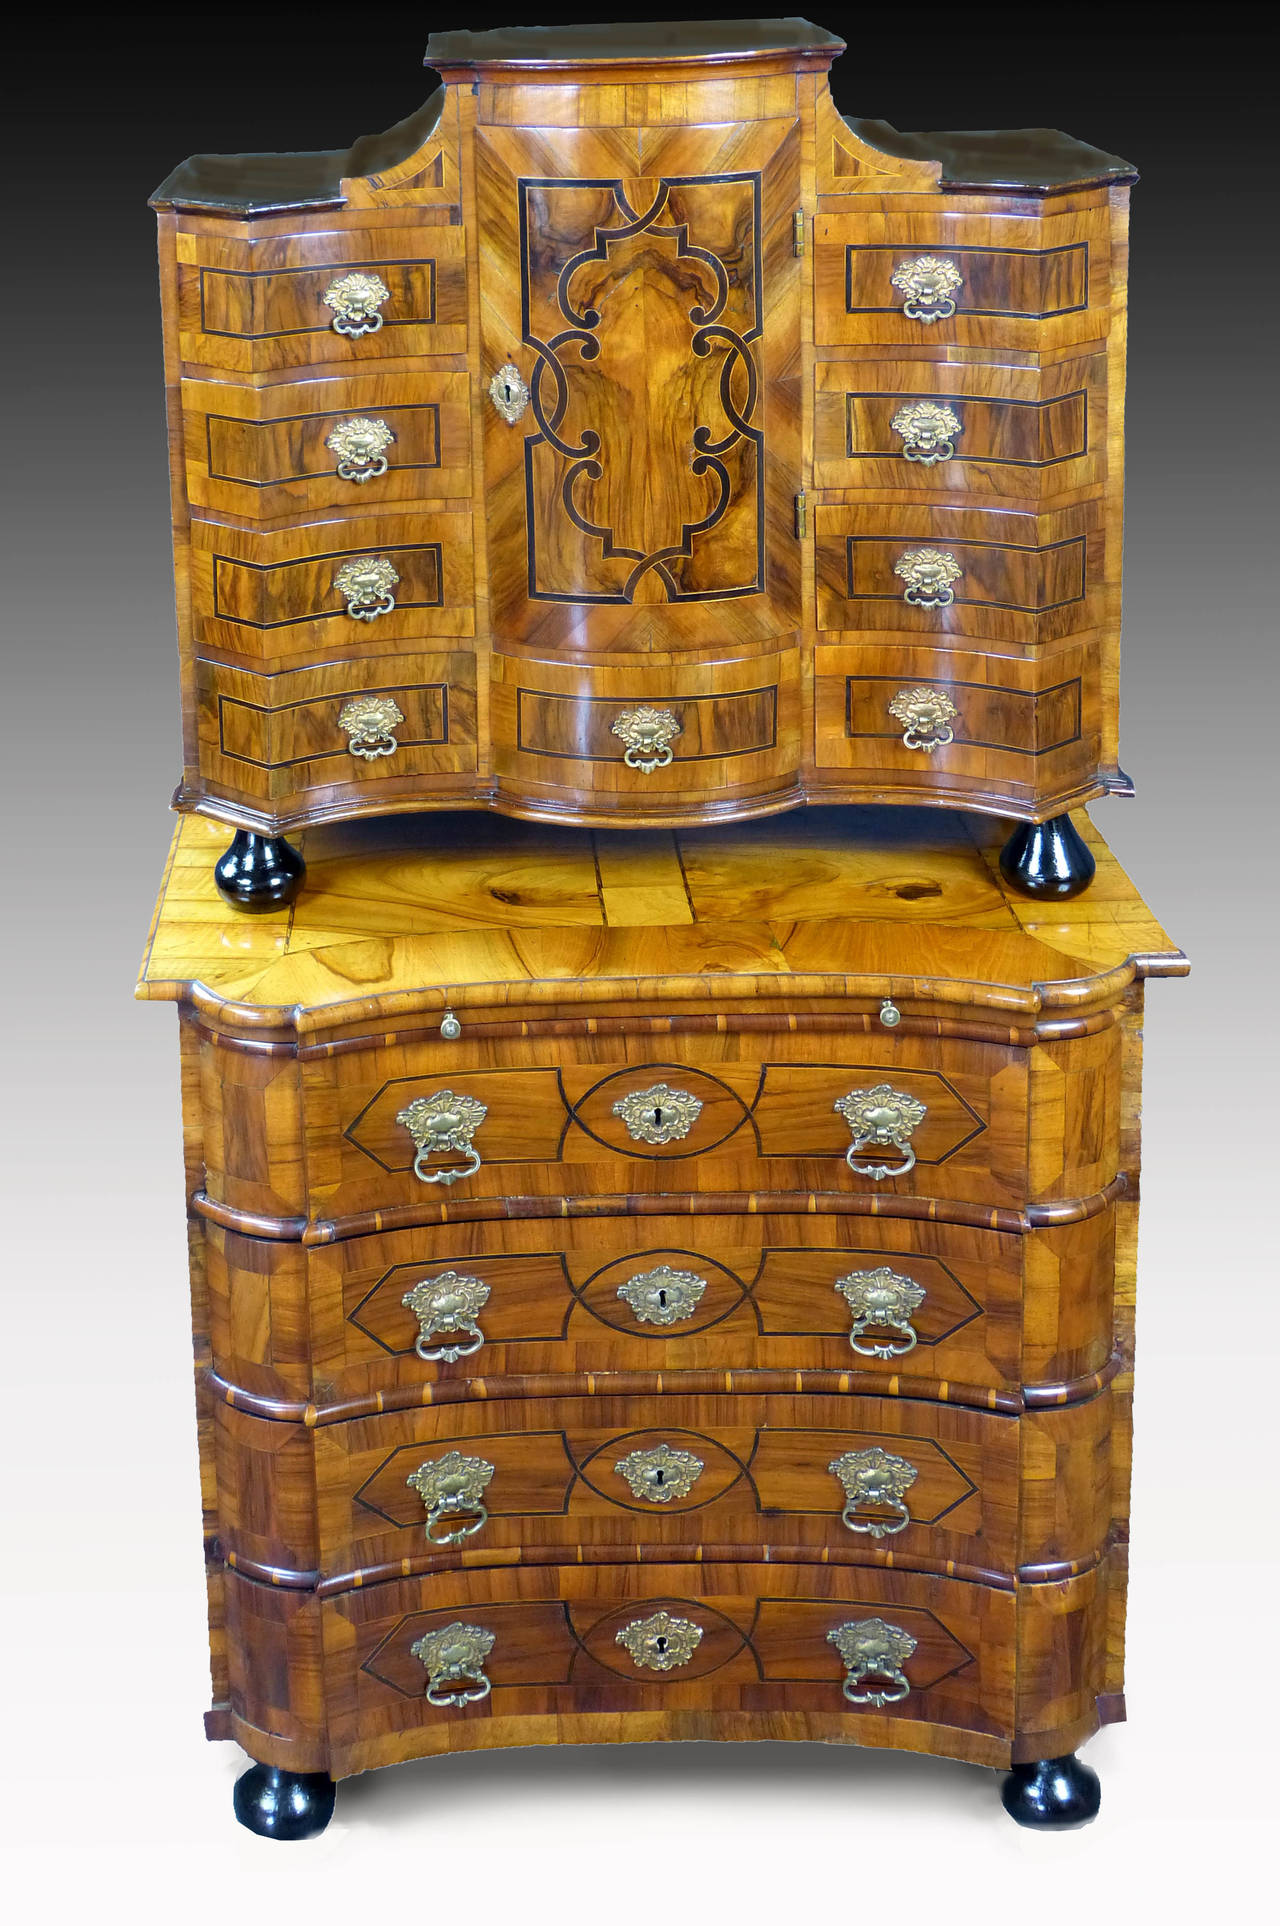 Outstanding mid-18th century Baroque South German figured walnut cabinet on chest, the superstructure with curved central door over single drawer, flanked by eight drawers, all with secret locking mechanism, over matched concave base with brushing